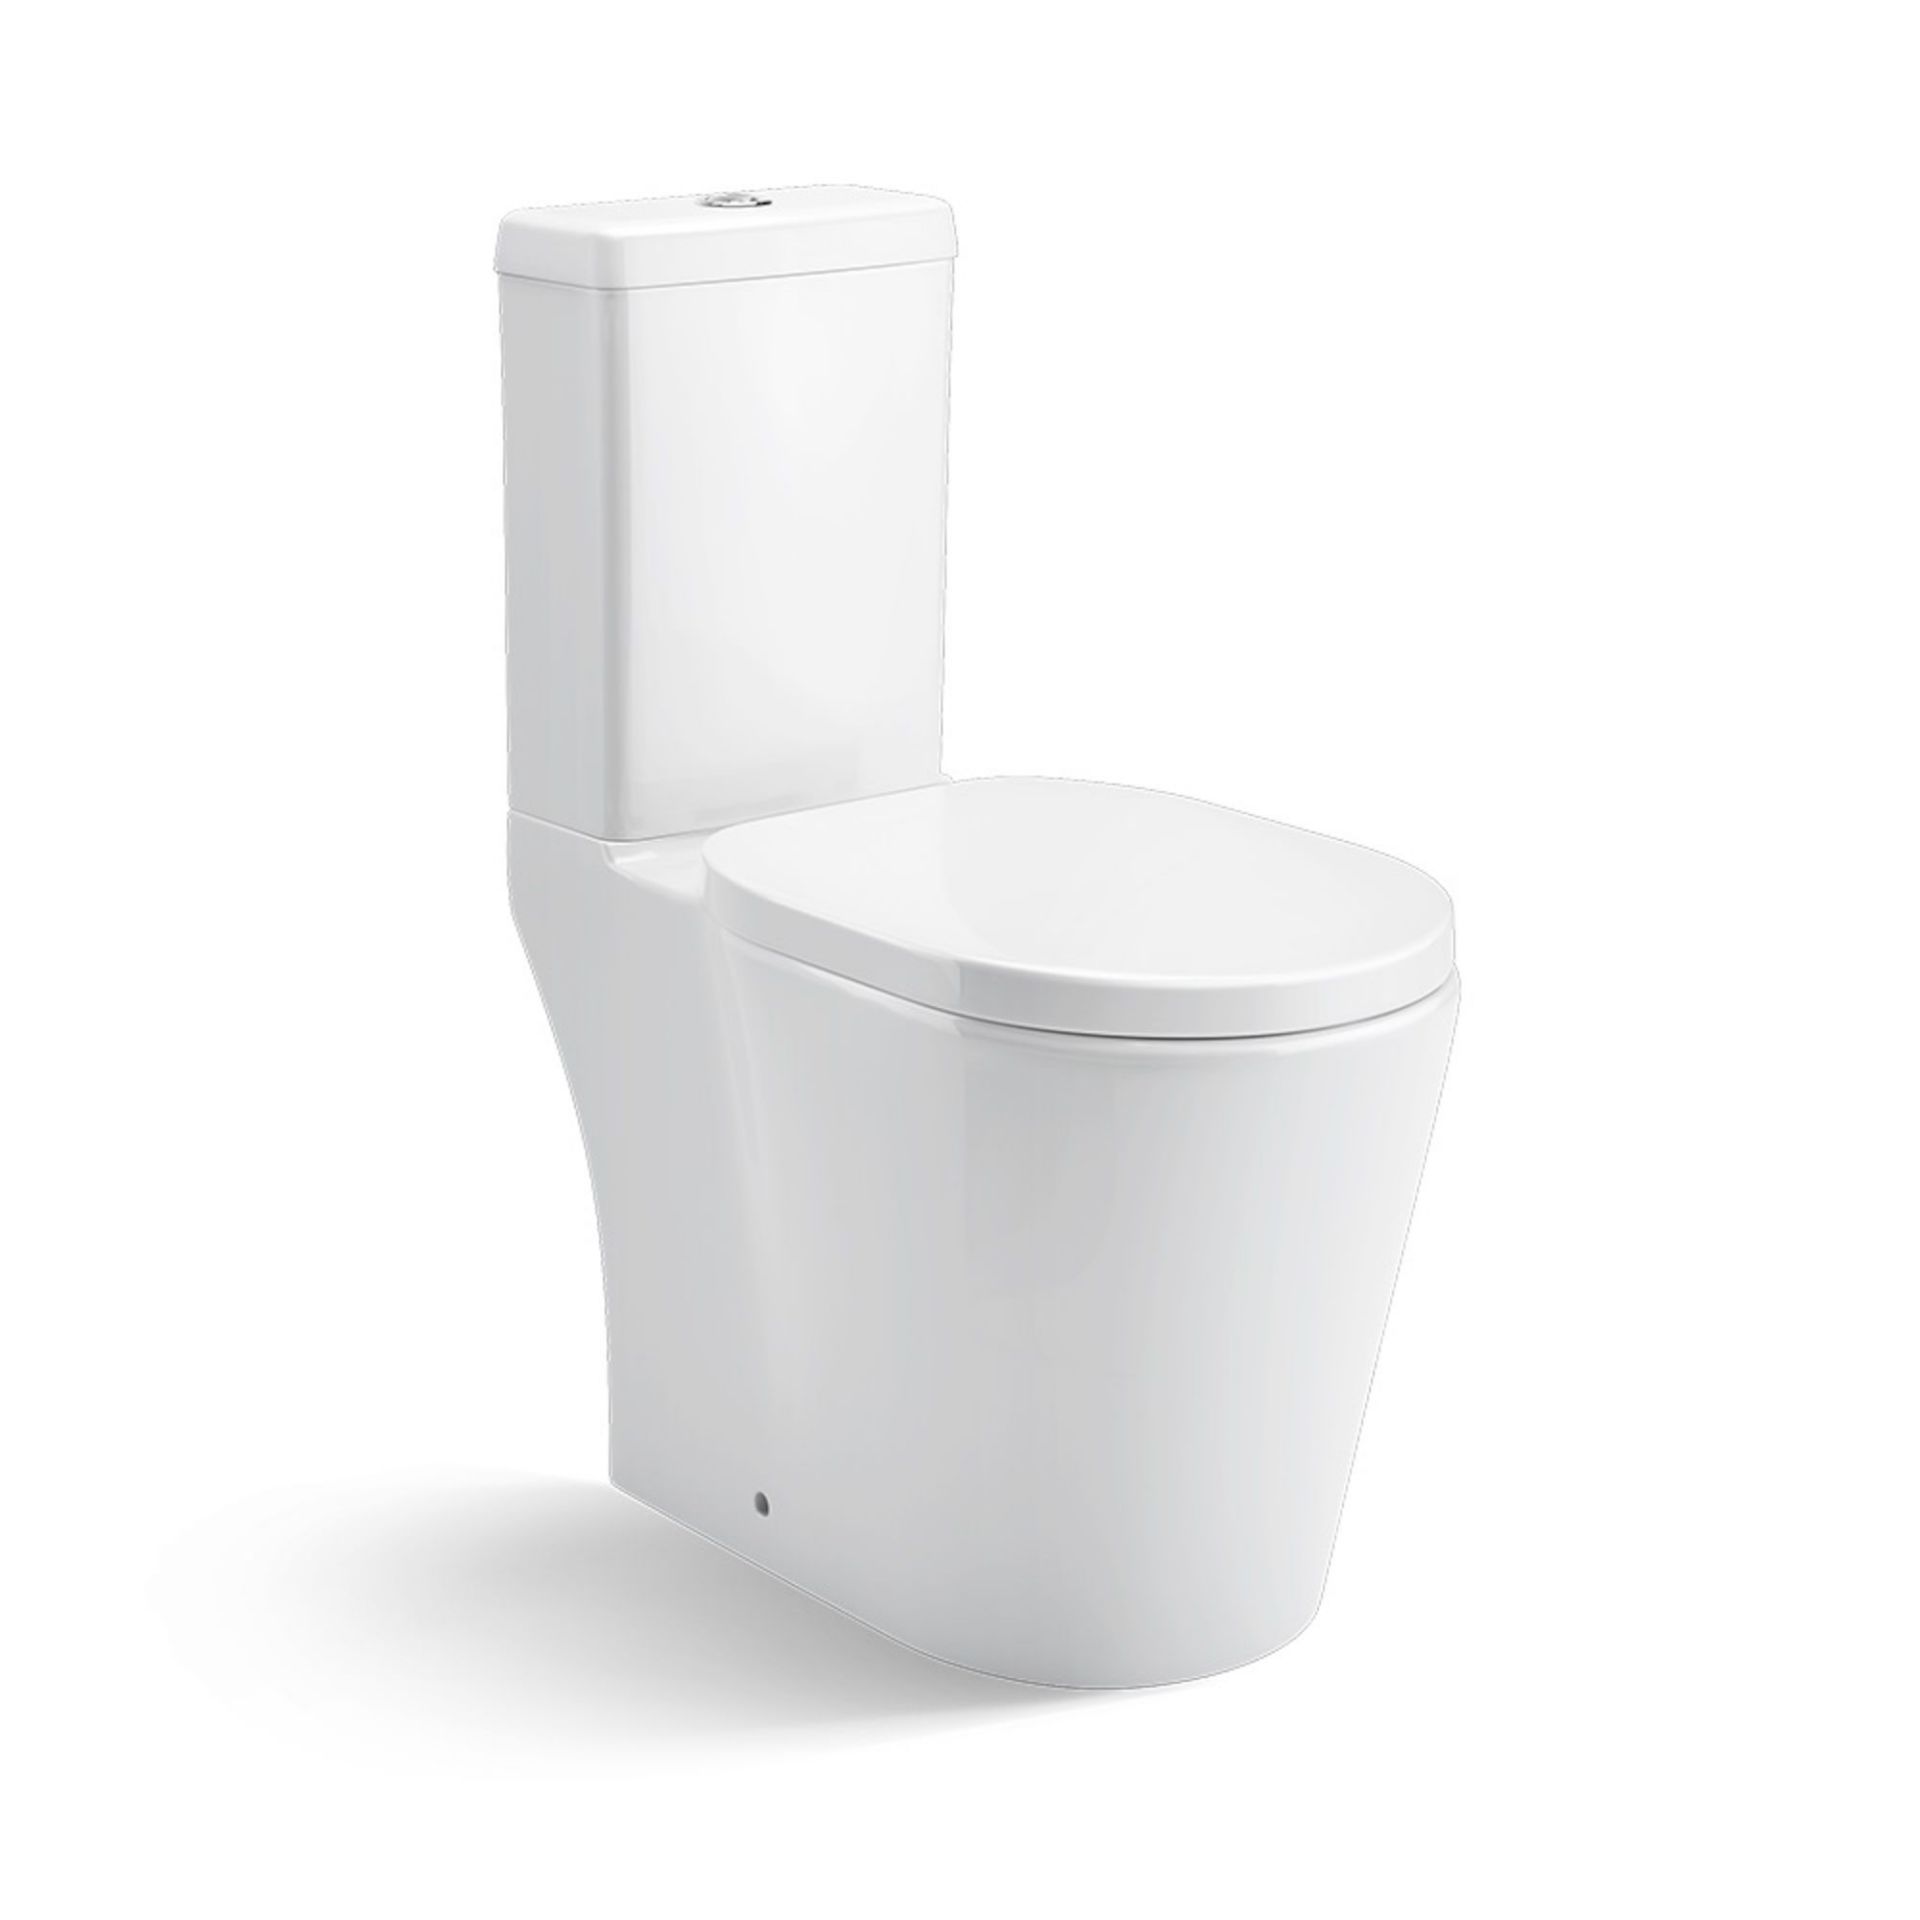 (MT54) Albi Close Coupled Toilet & Cistern inc Soft Close Seat This innovative toilet is the - Image 2 of 4